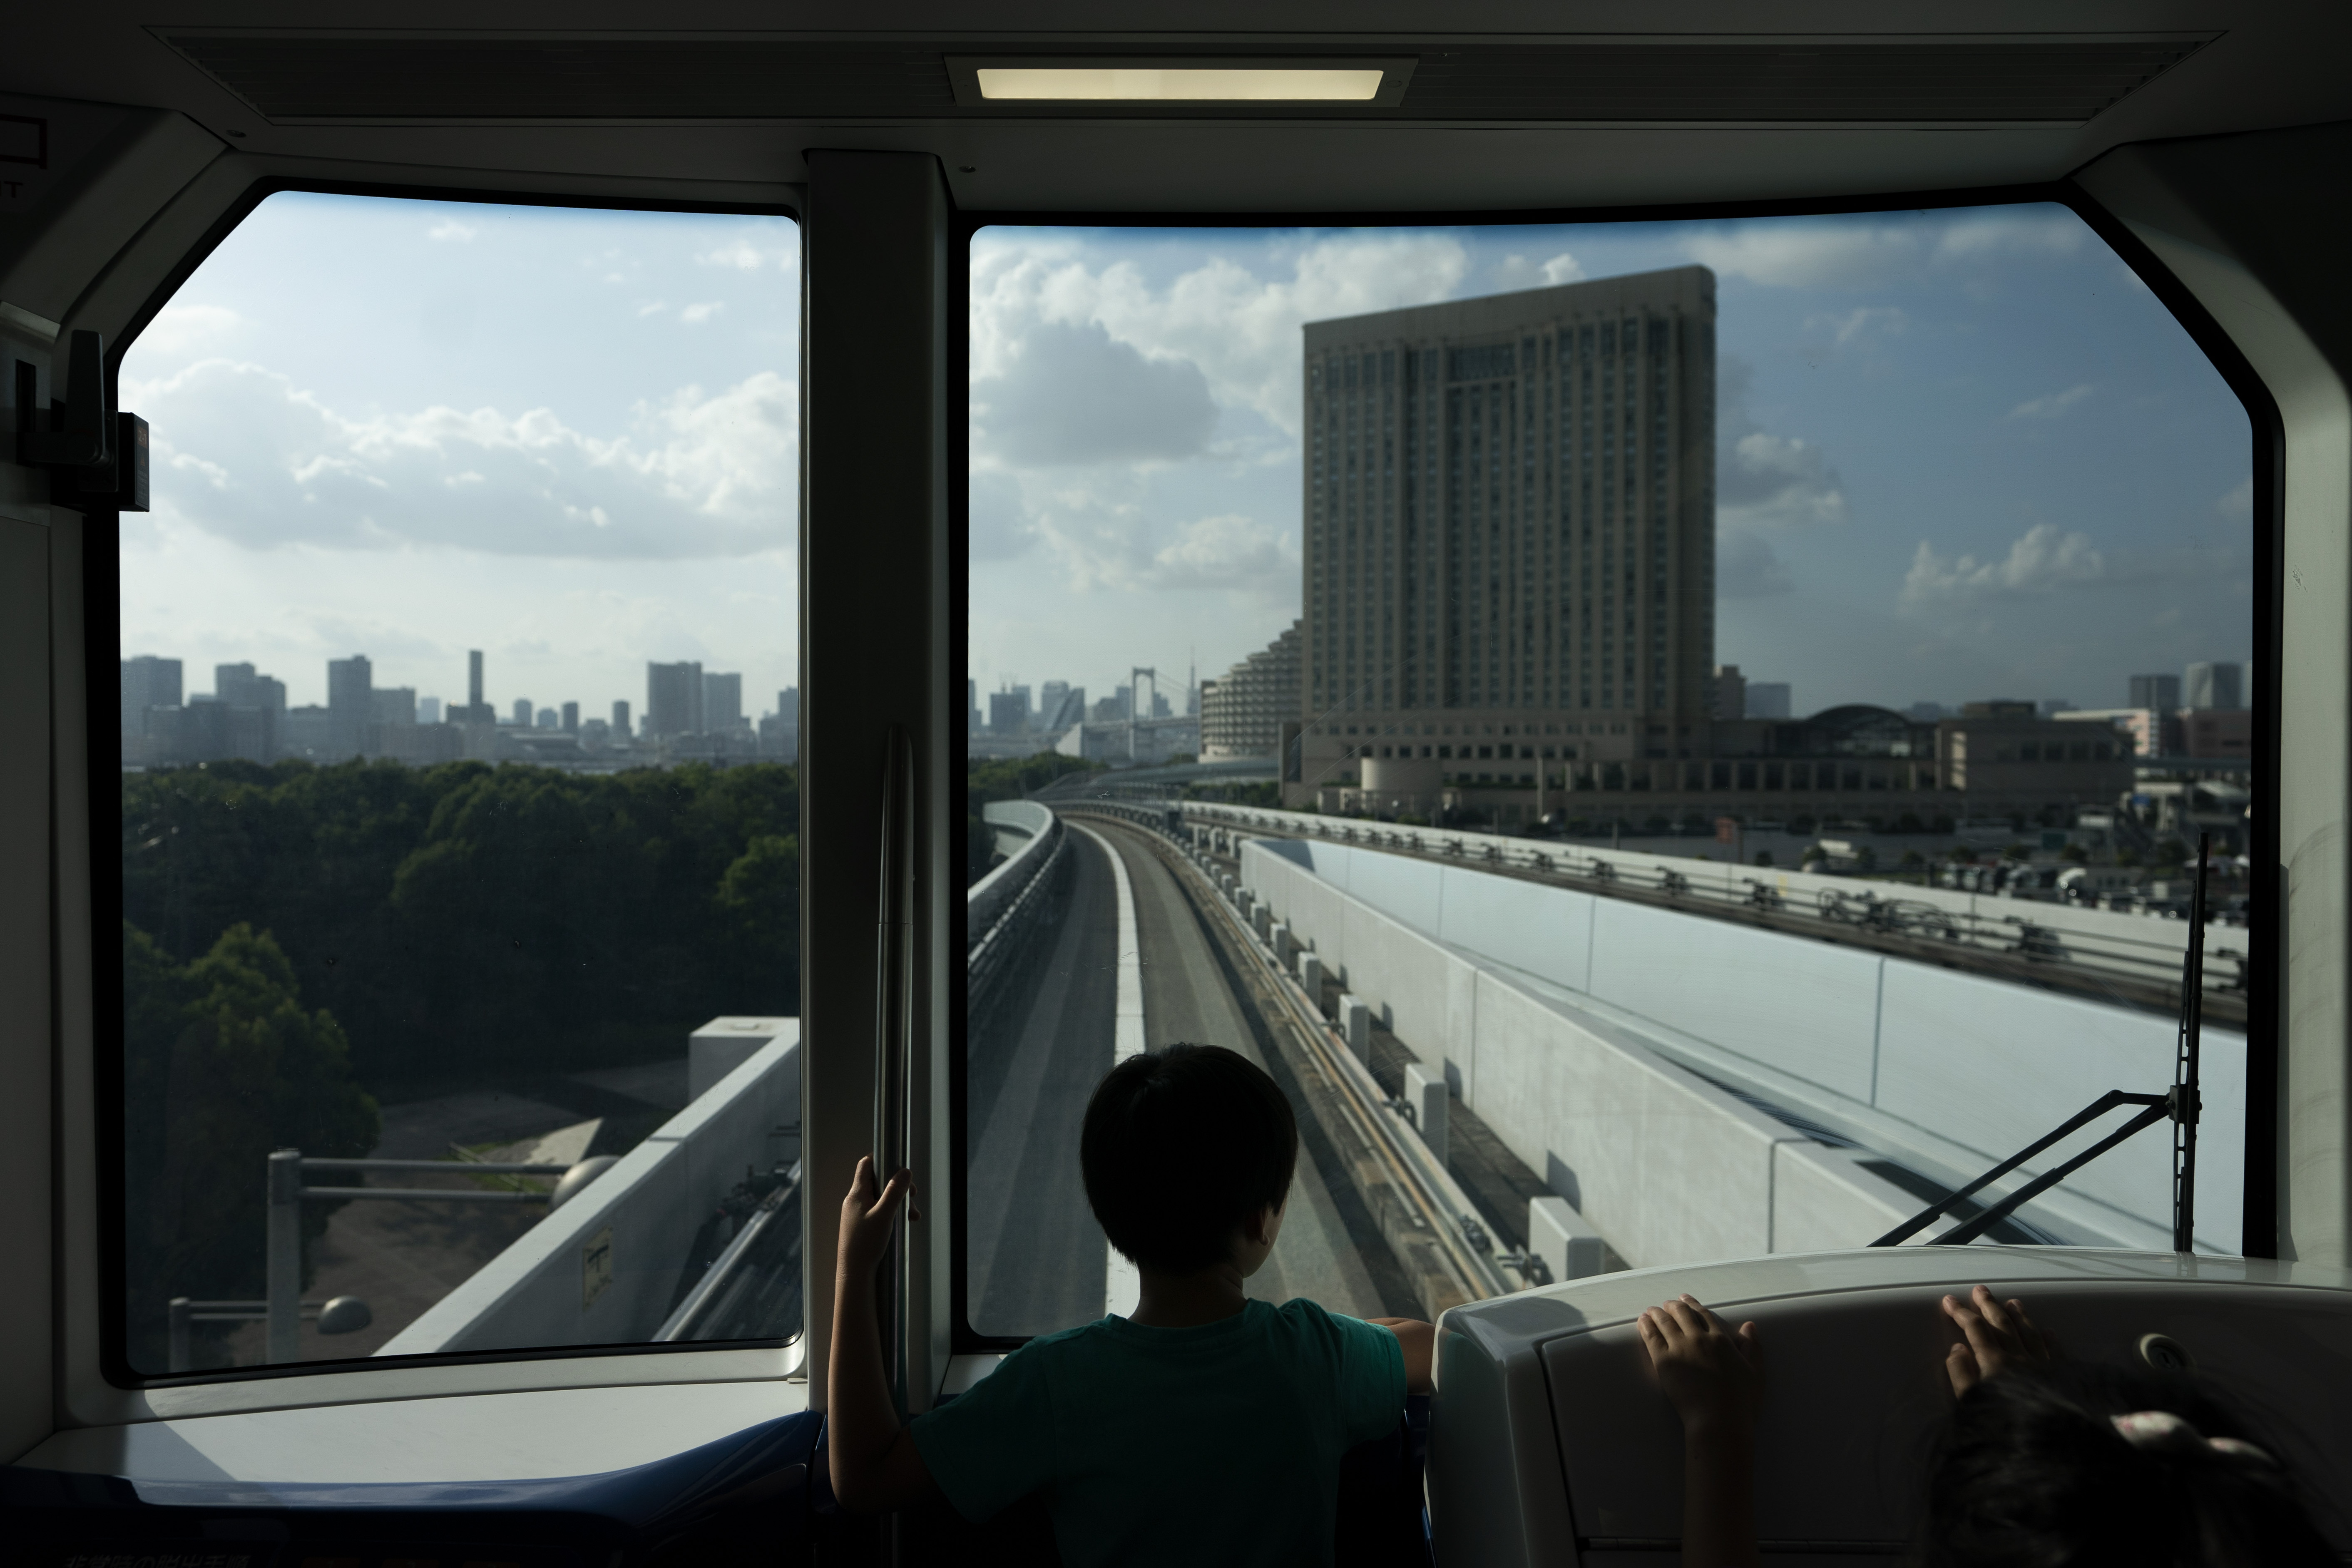 A young boy views the Tokyo skyline in the distance from a train running along the Yurikamome line Sunday, May 19, 2019, in Tokyo. (AP Photo/Jae C. Hong)